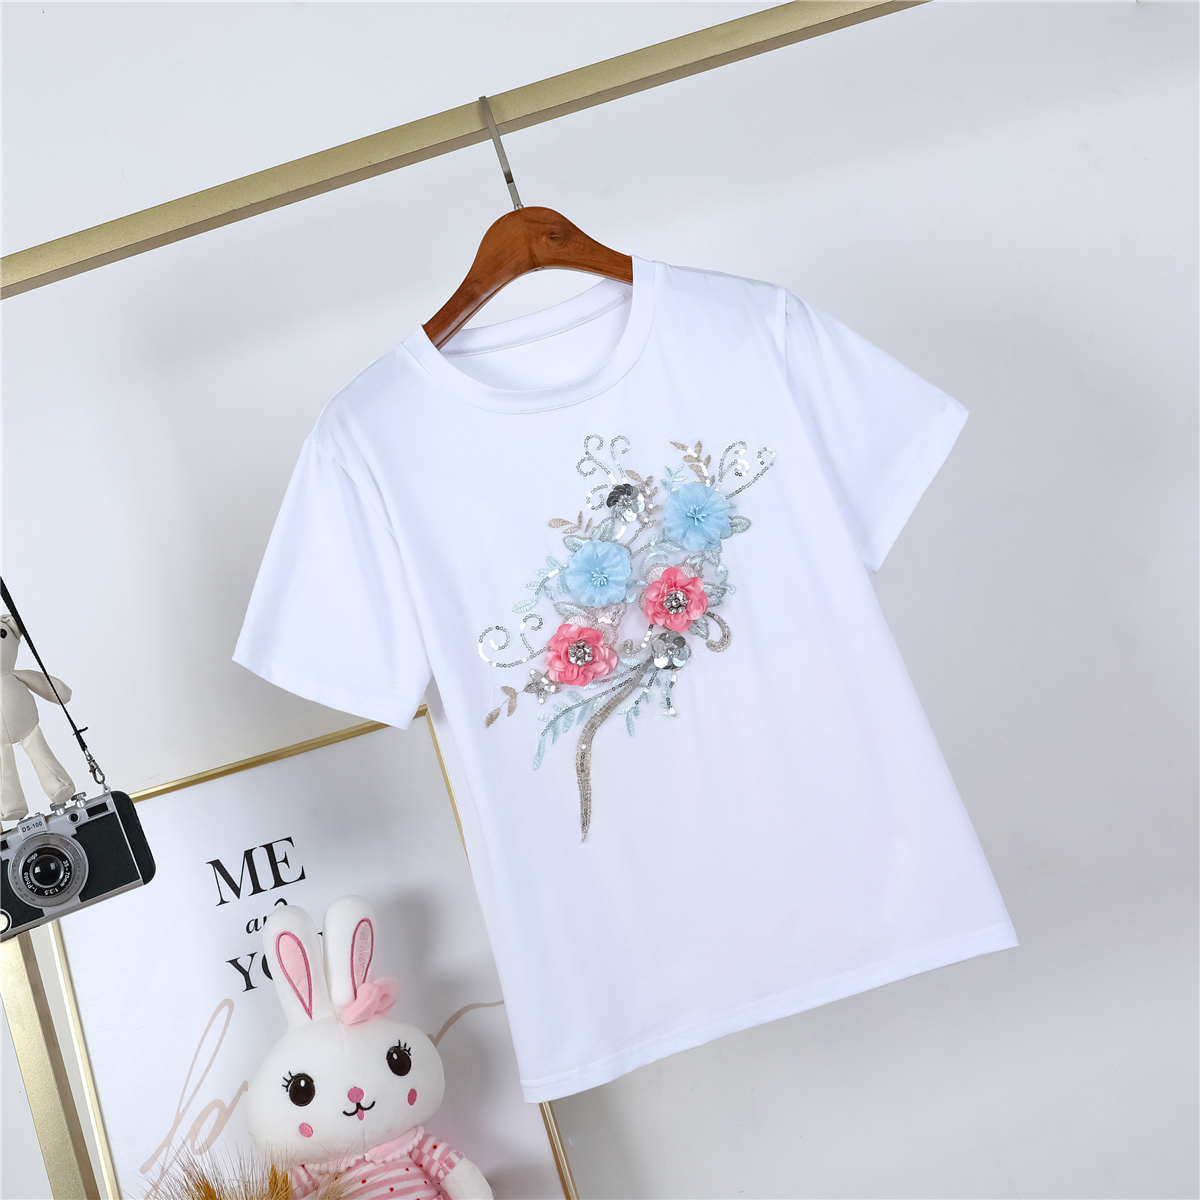 Fine Casual short sleeve pure cotton shirt for women